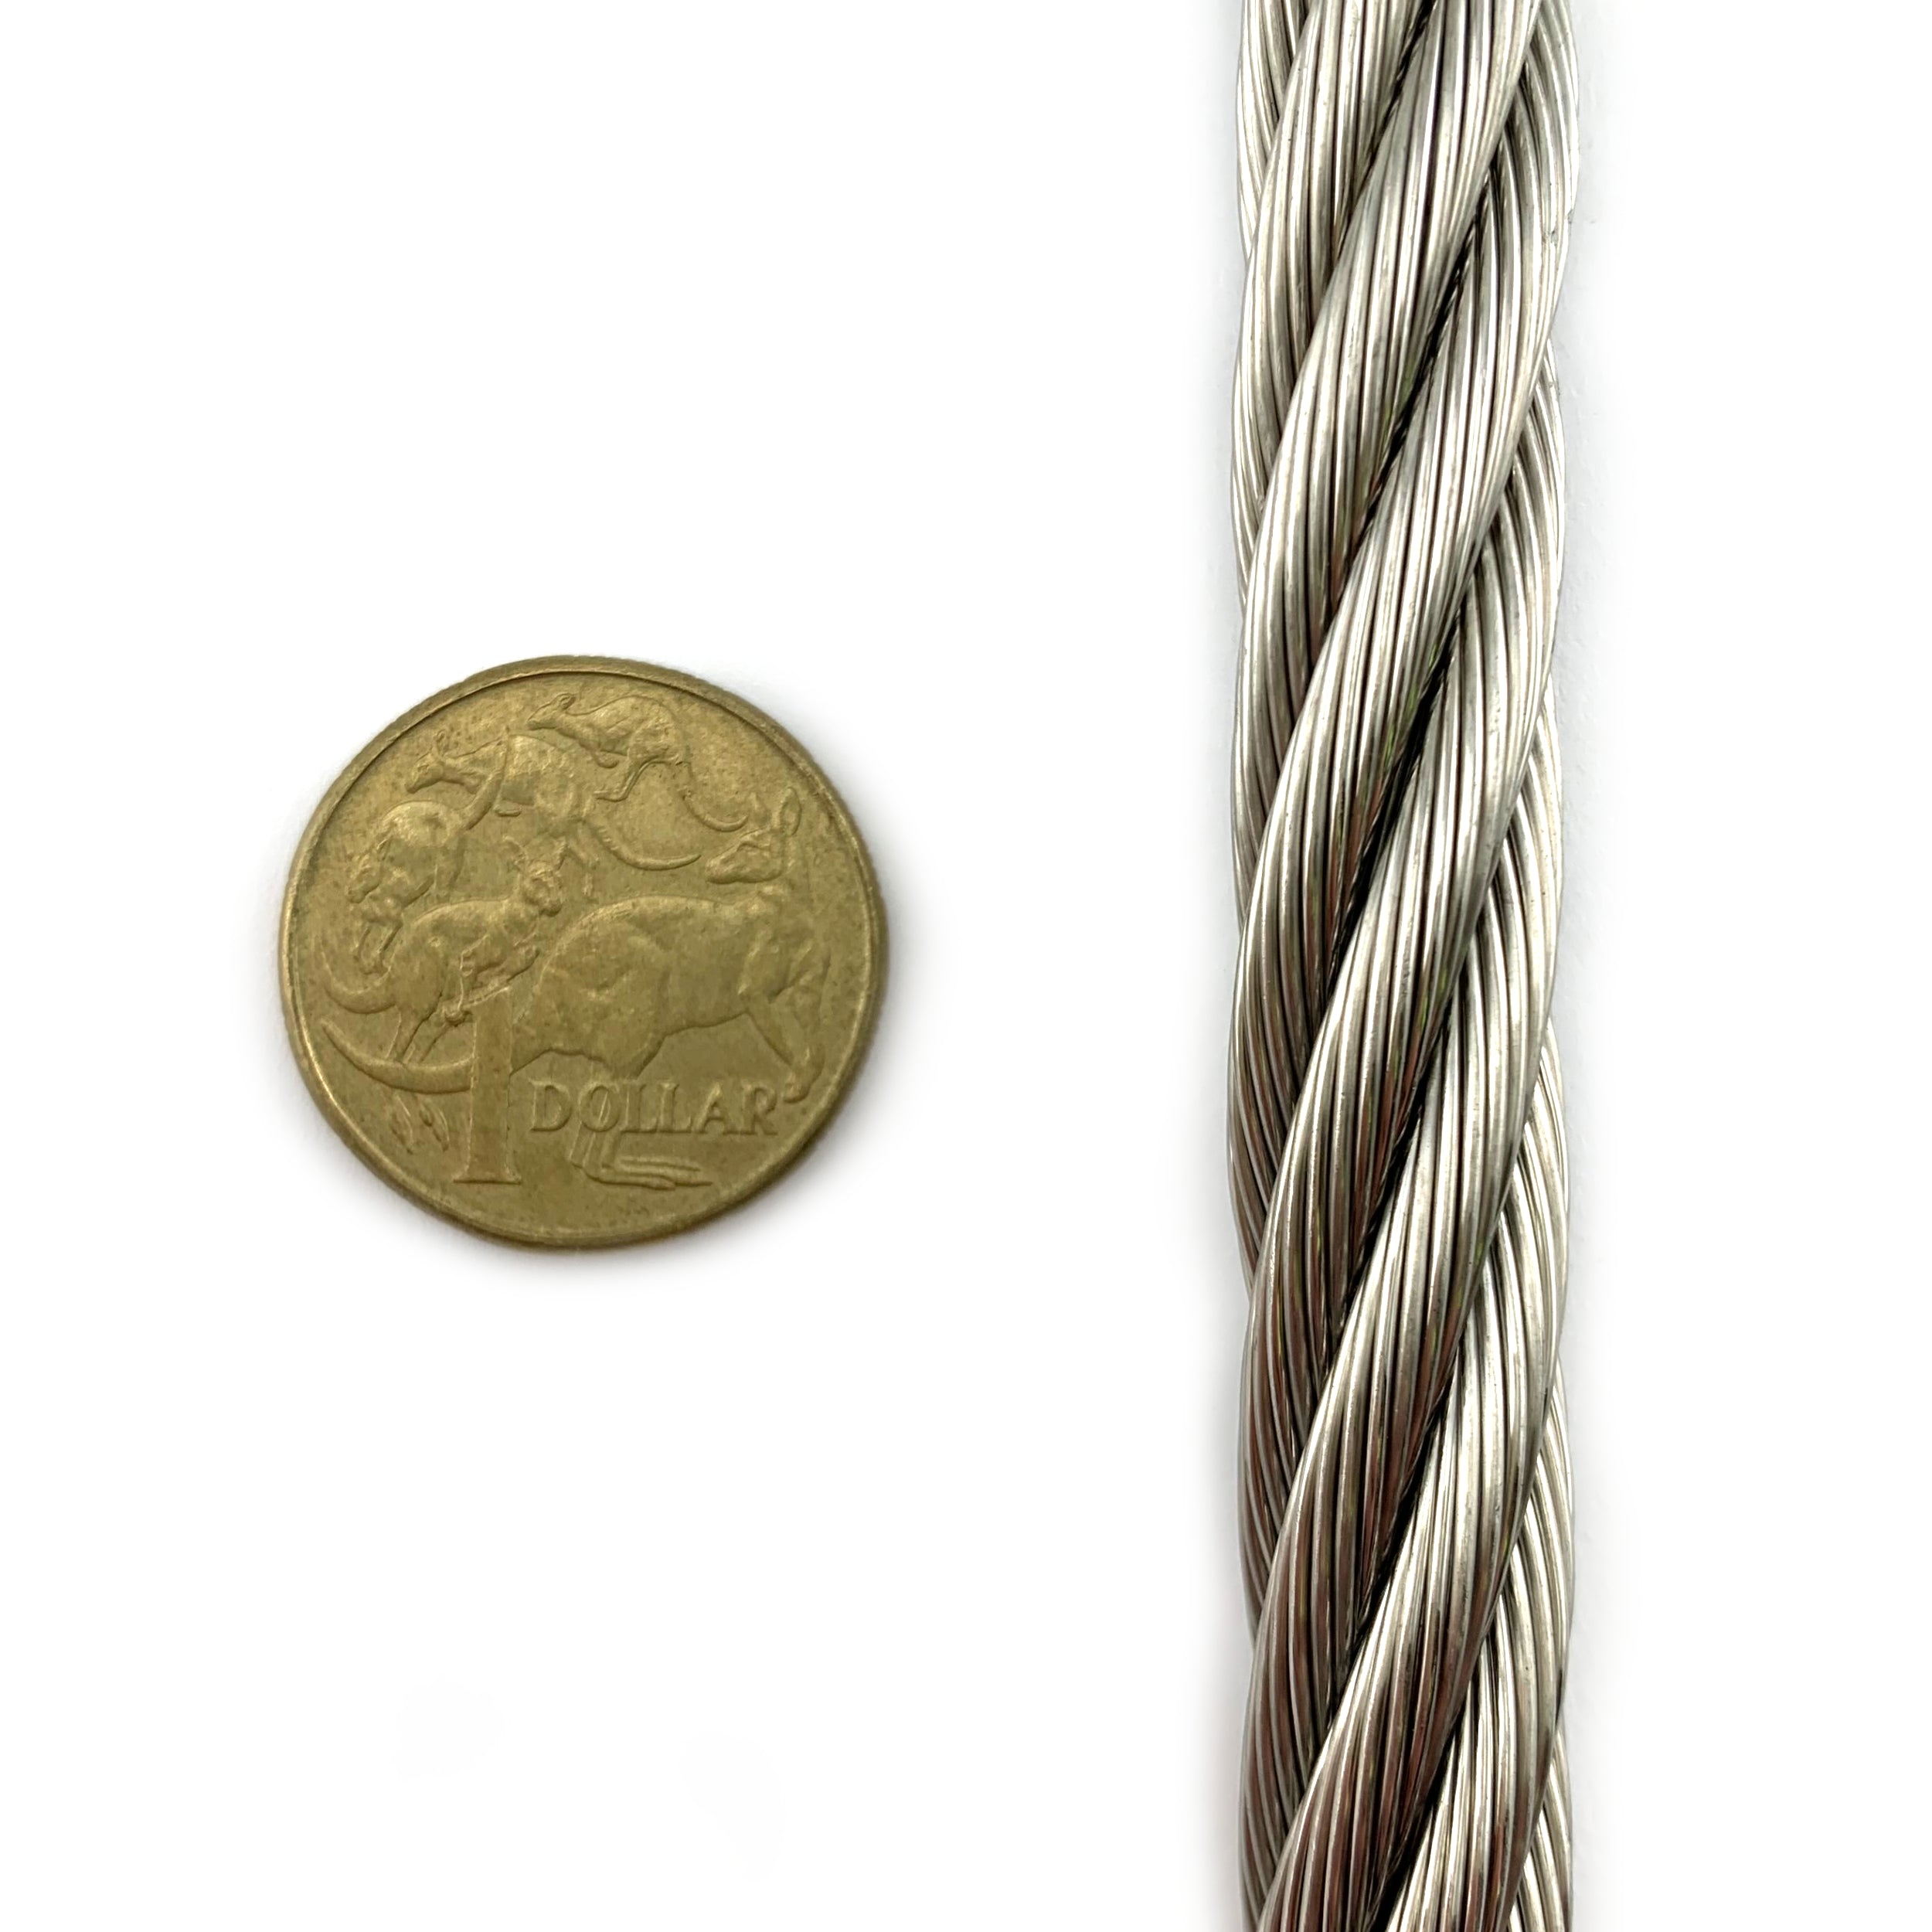 Stainless Steel wire rope (wire cord), size 12mm, qty 40 metres. Australia.